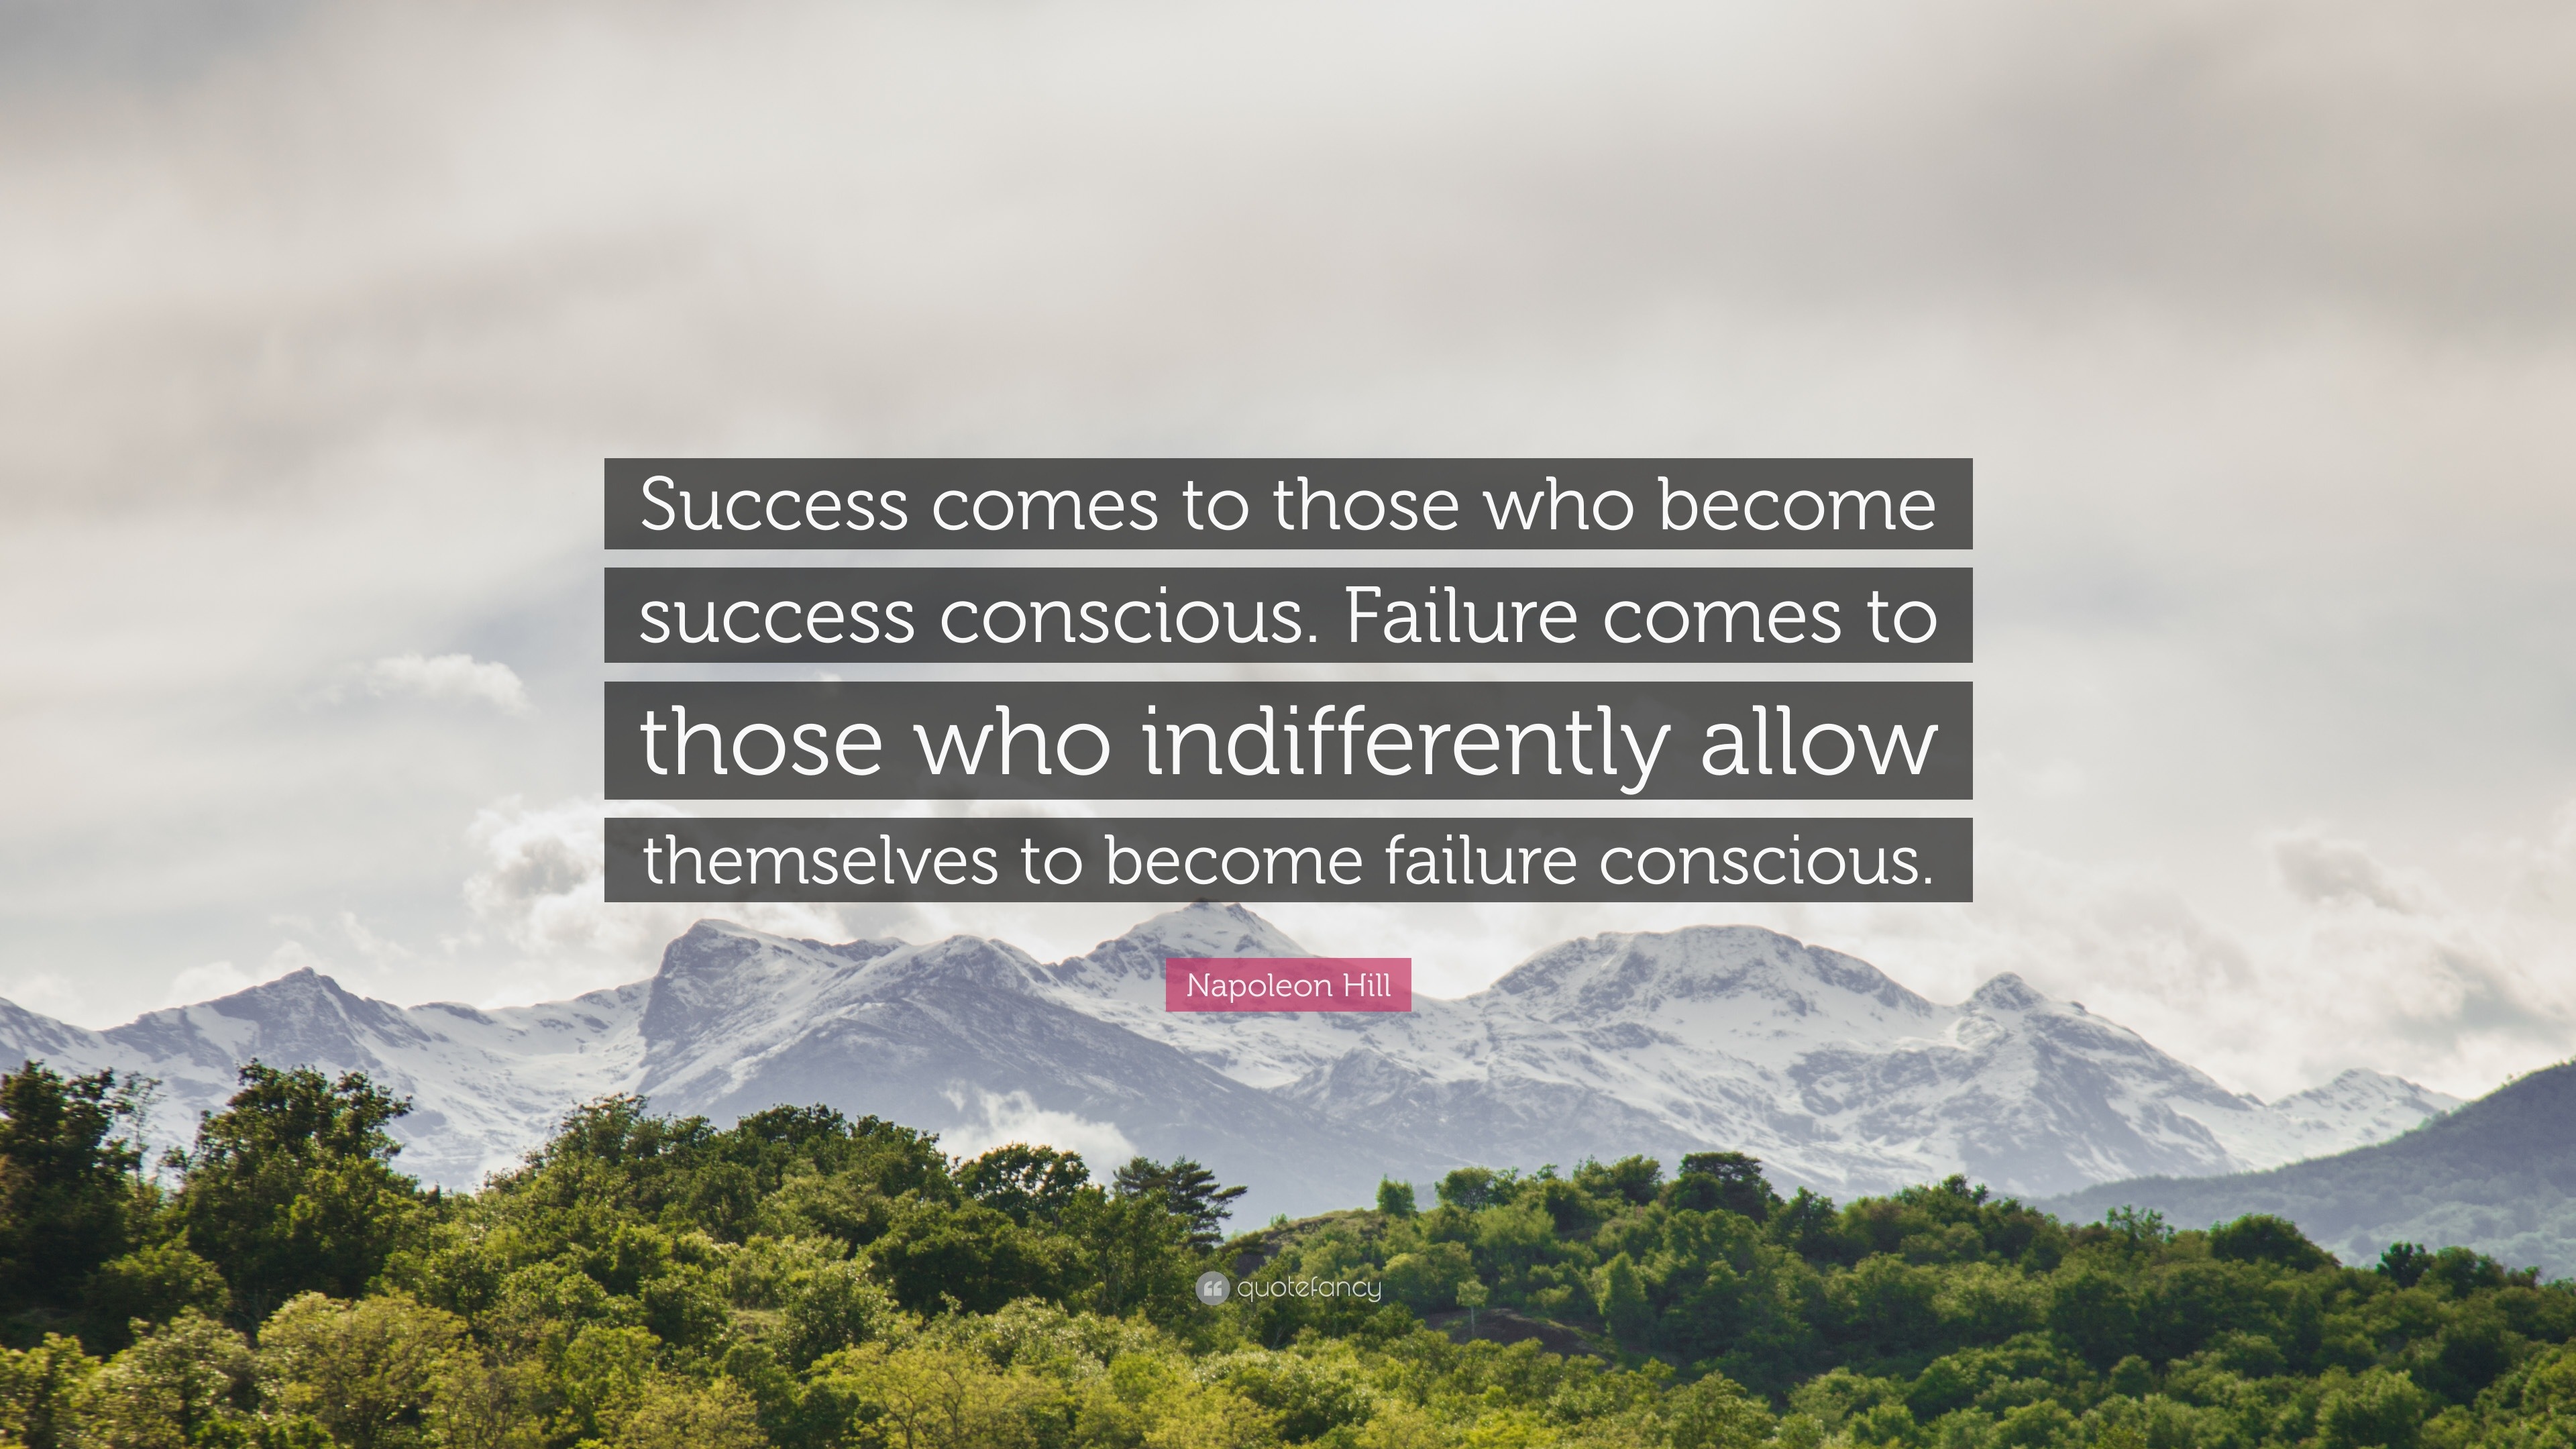 How to Turn Failure into Success: from Napoleon Hill, by Chachi Gustin